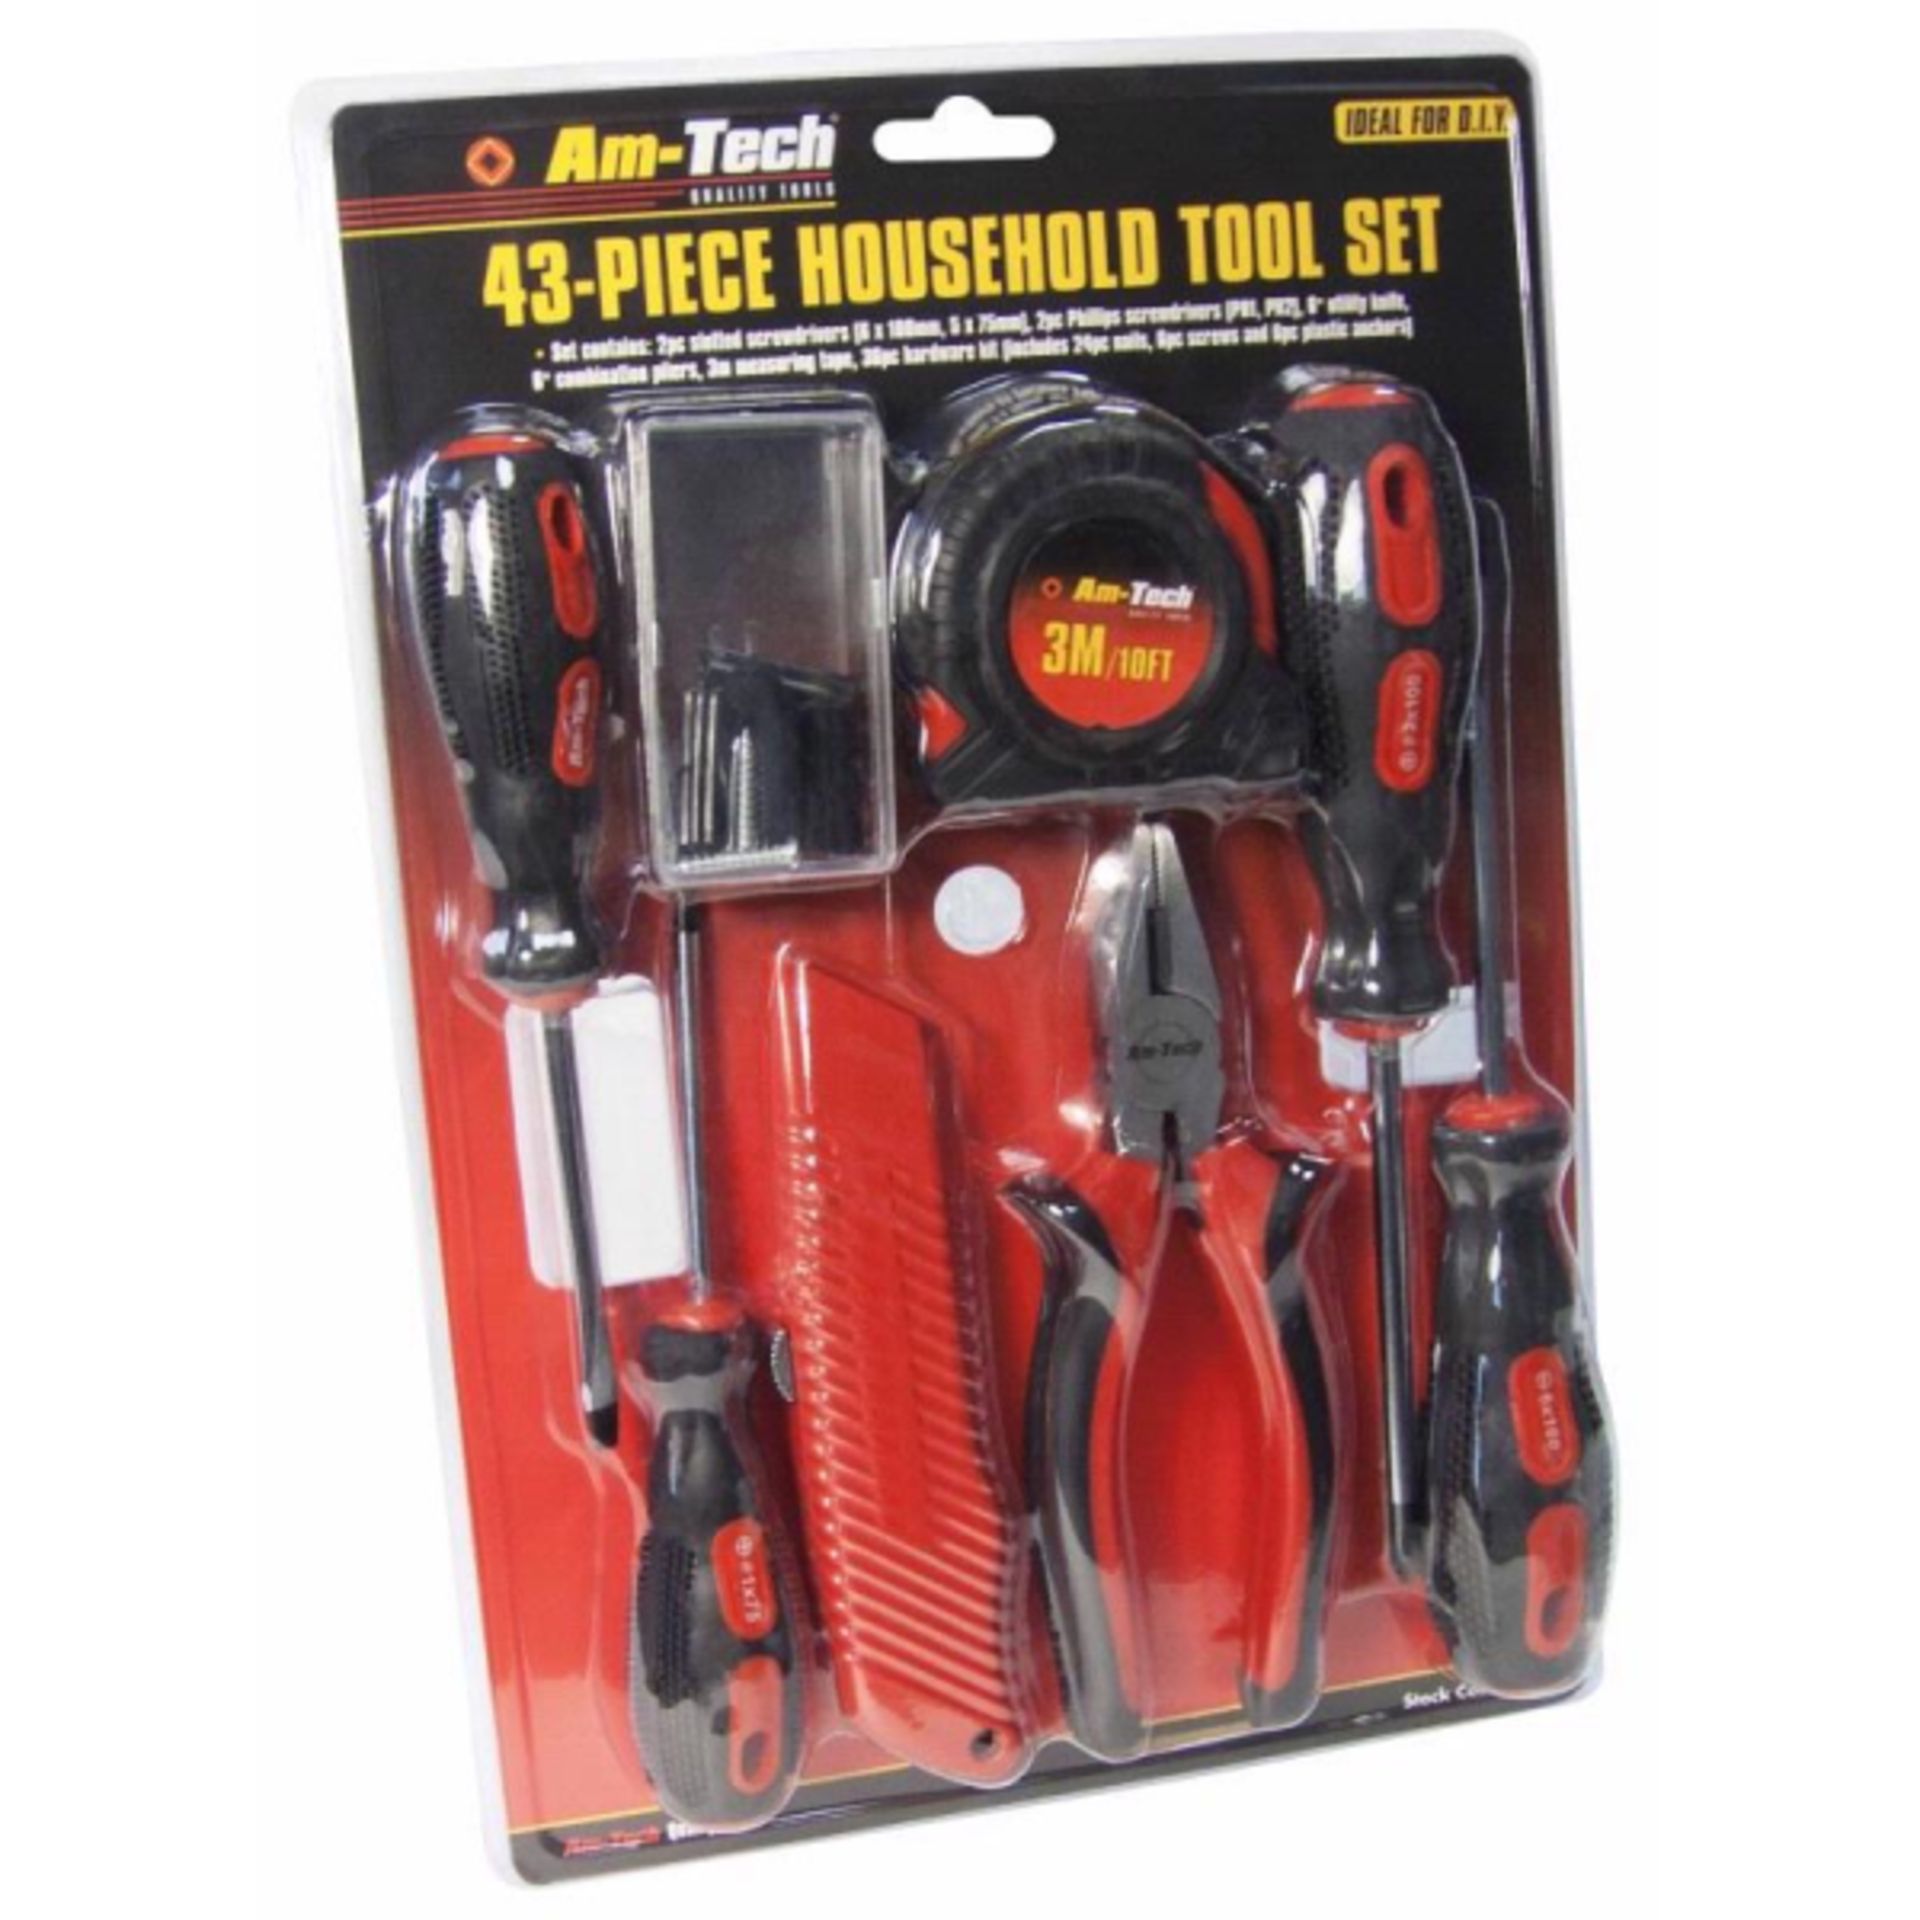 V *TRADE QTY* Brand New Forty Three Piece Household Tool Set Inc Pliers, Screwdrivers Etc X 3 YOUR